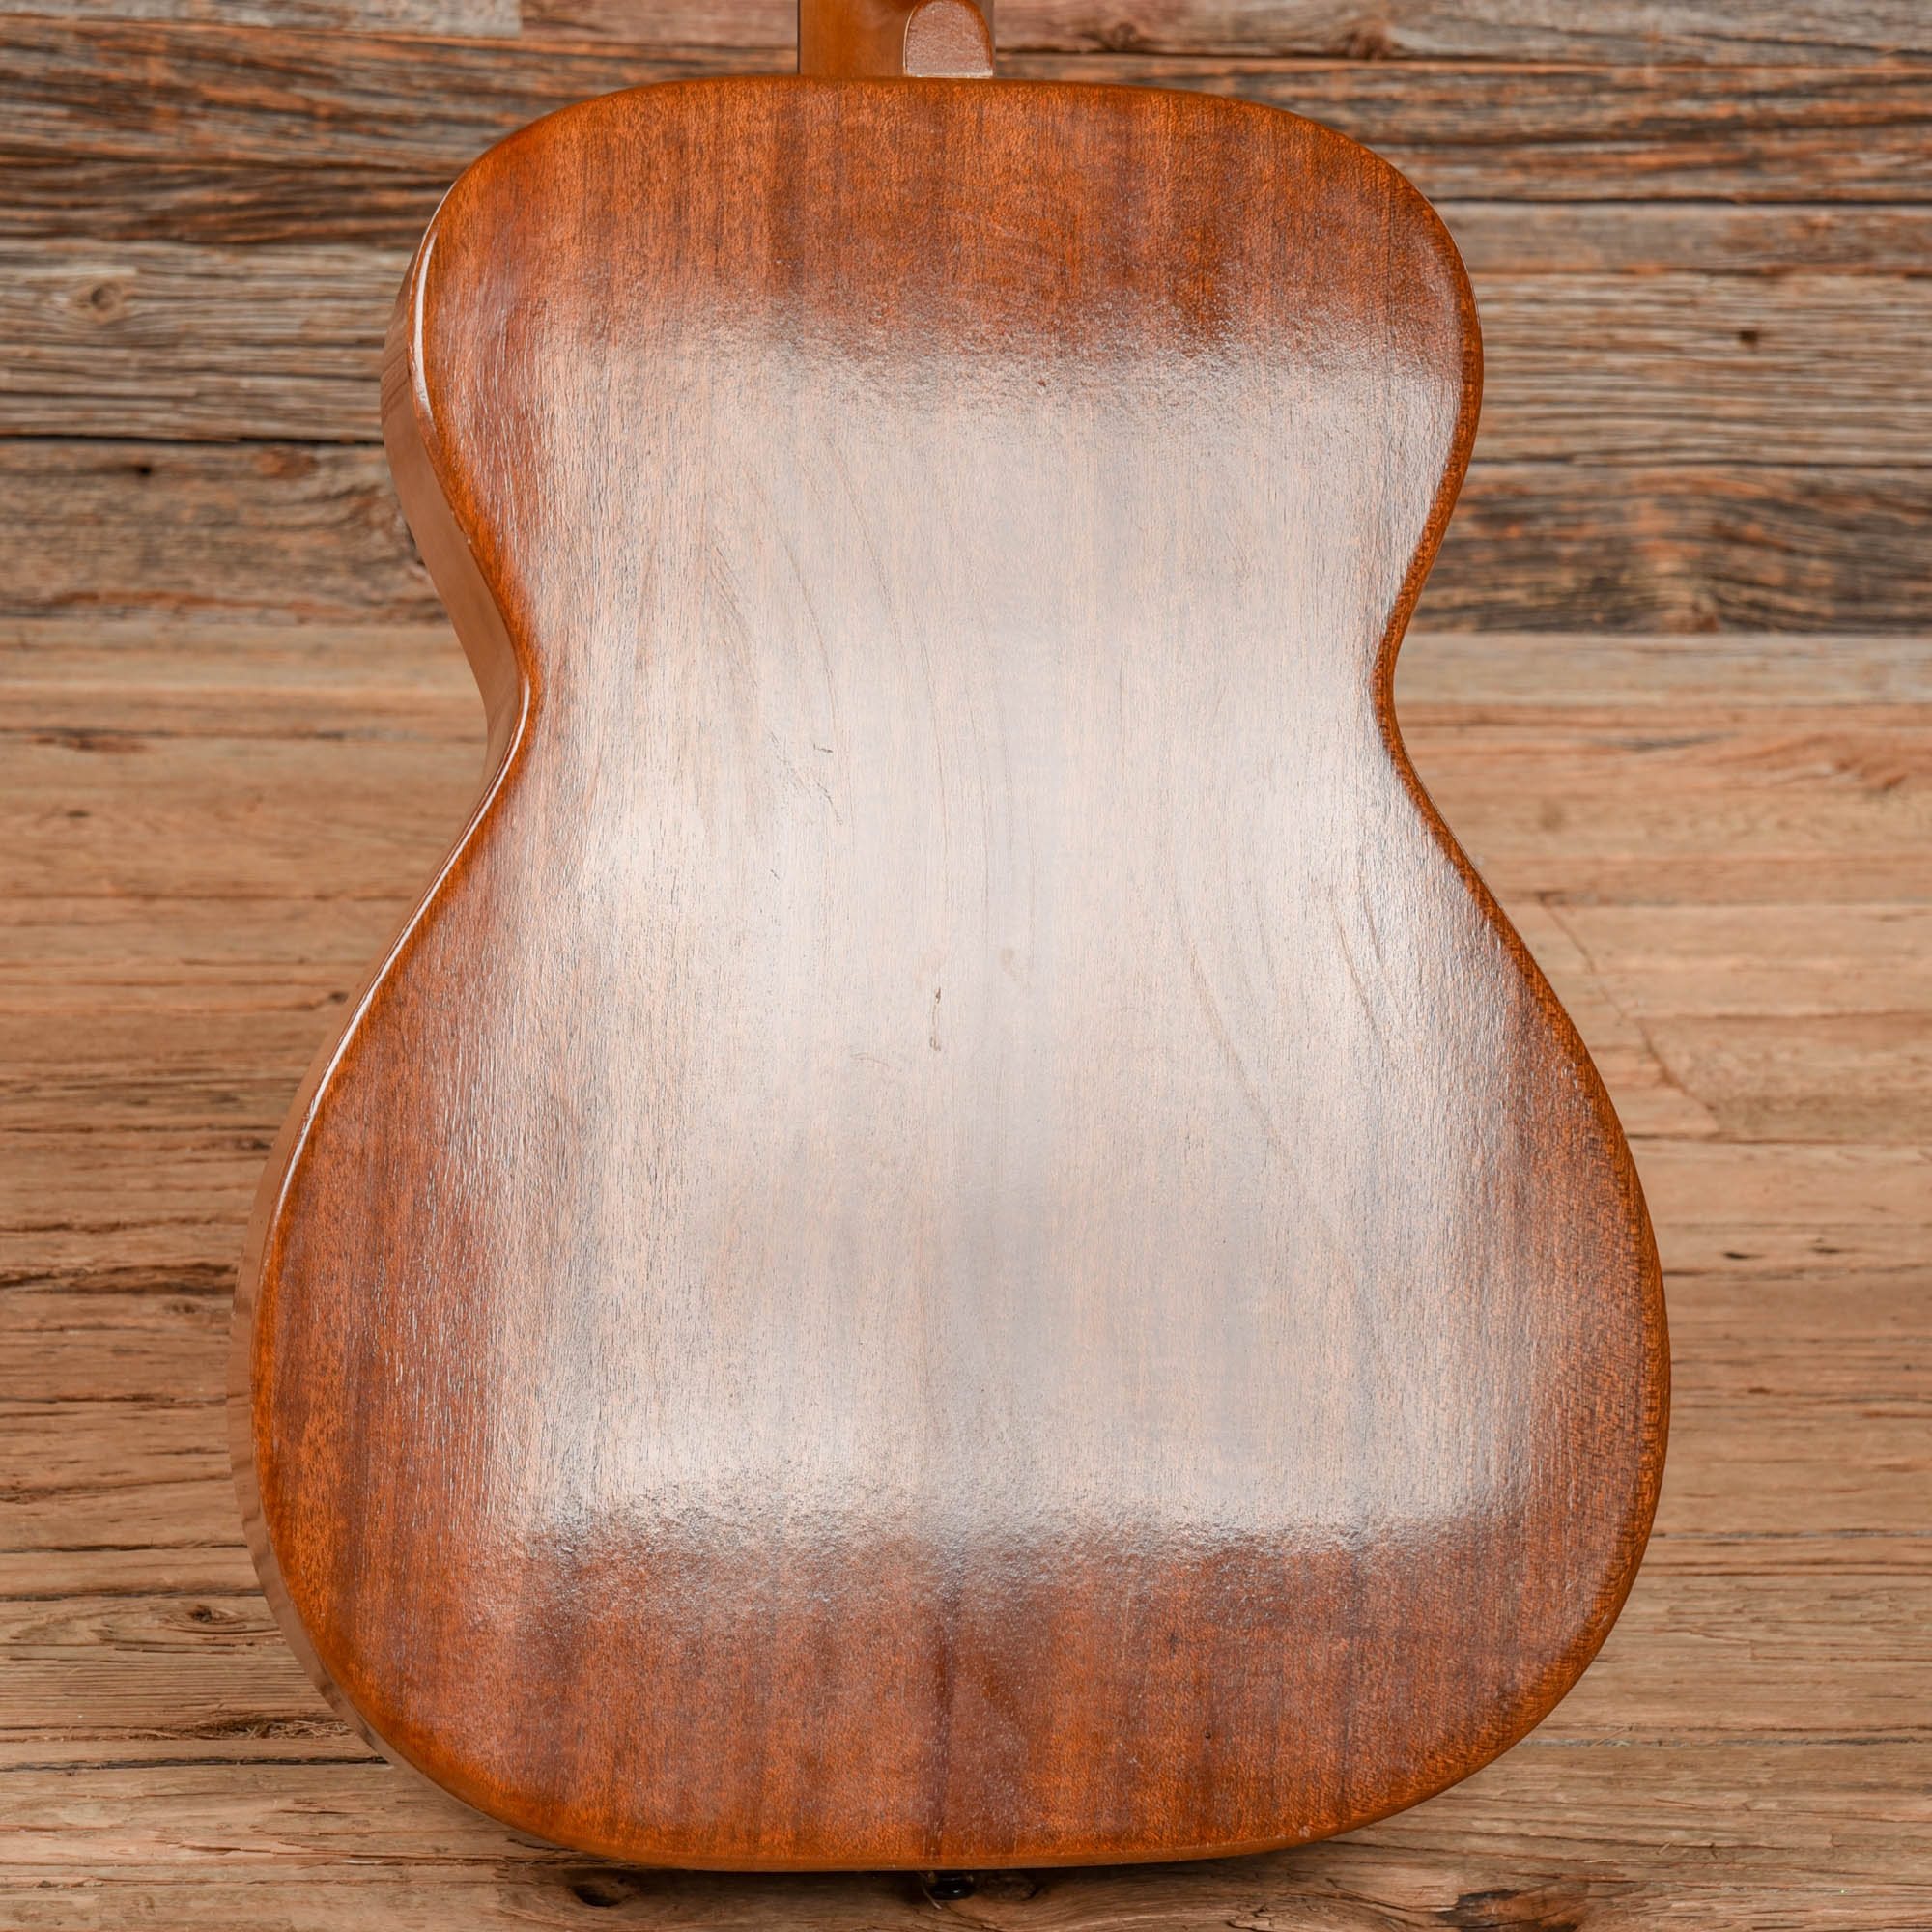 Harmony Acoustic Natural 1960s